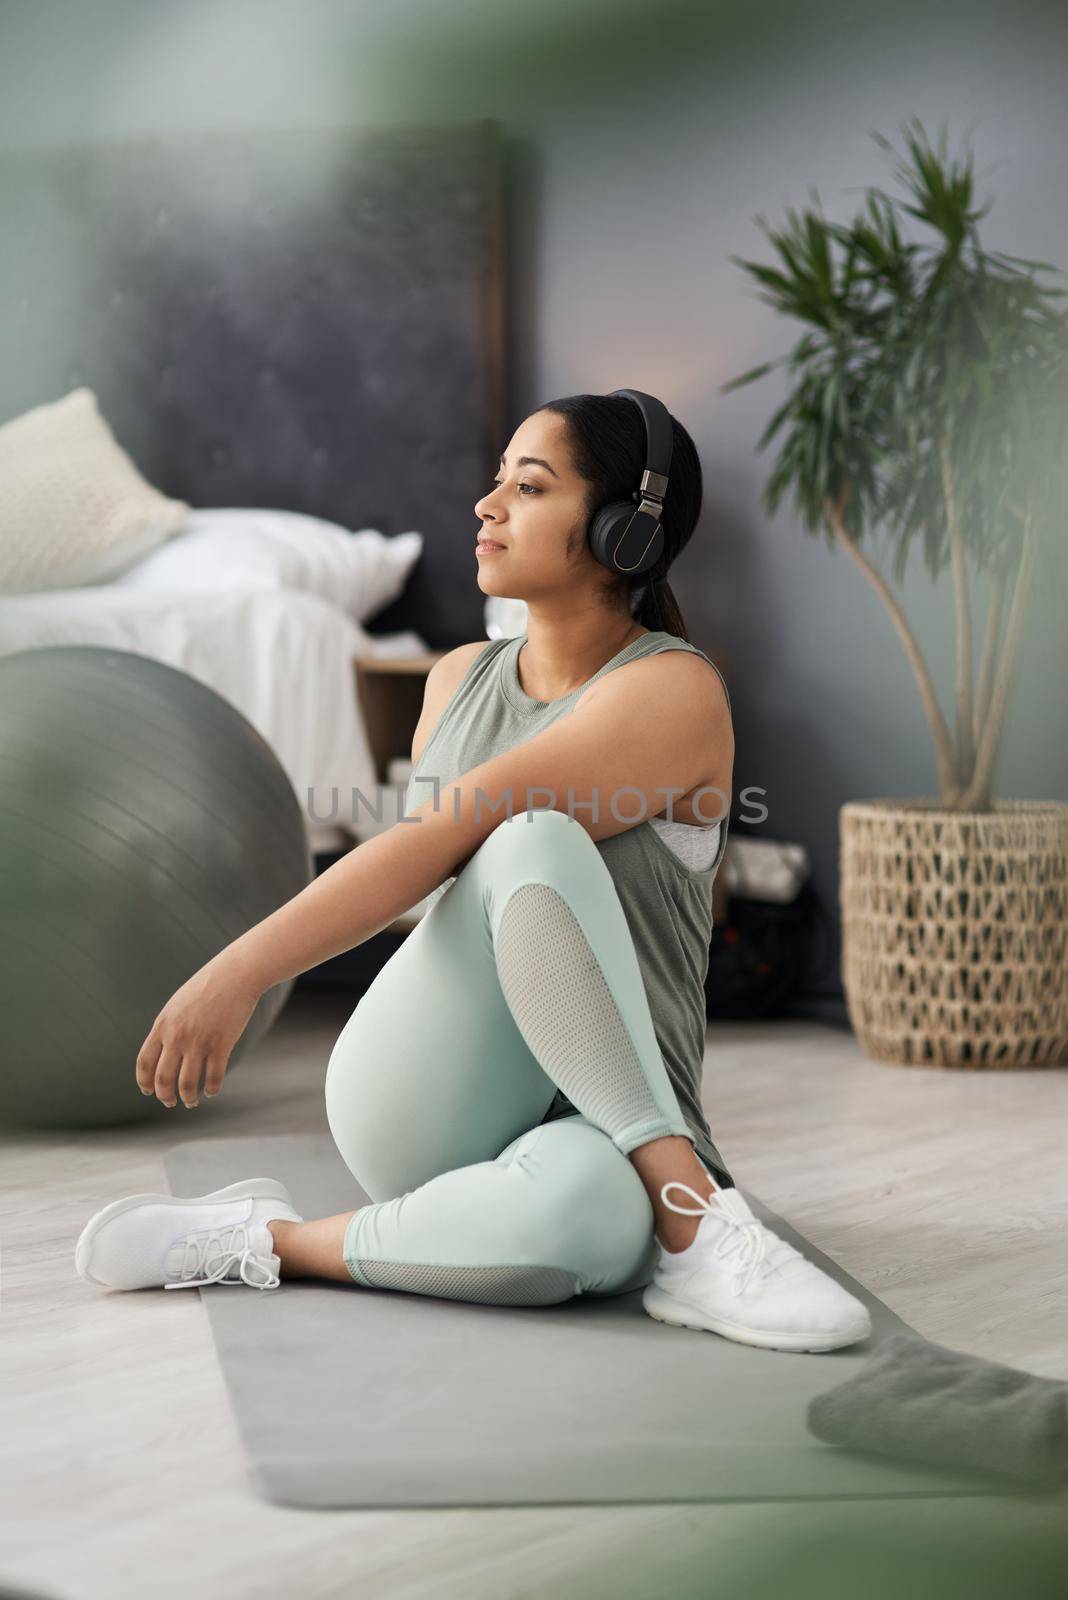 Getting a healthy start to her day. a sporty young woman listening to music while exercising at home